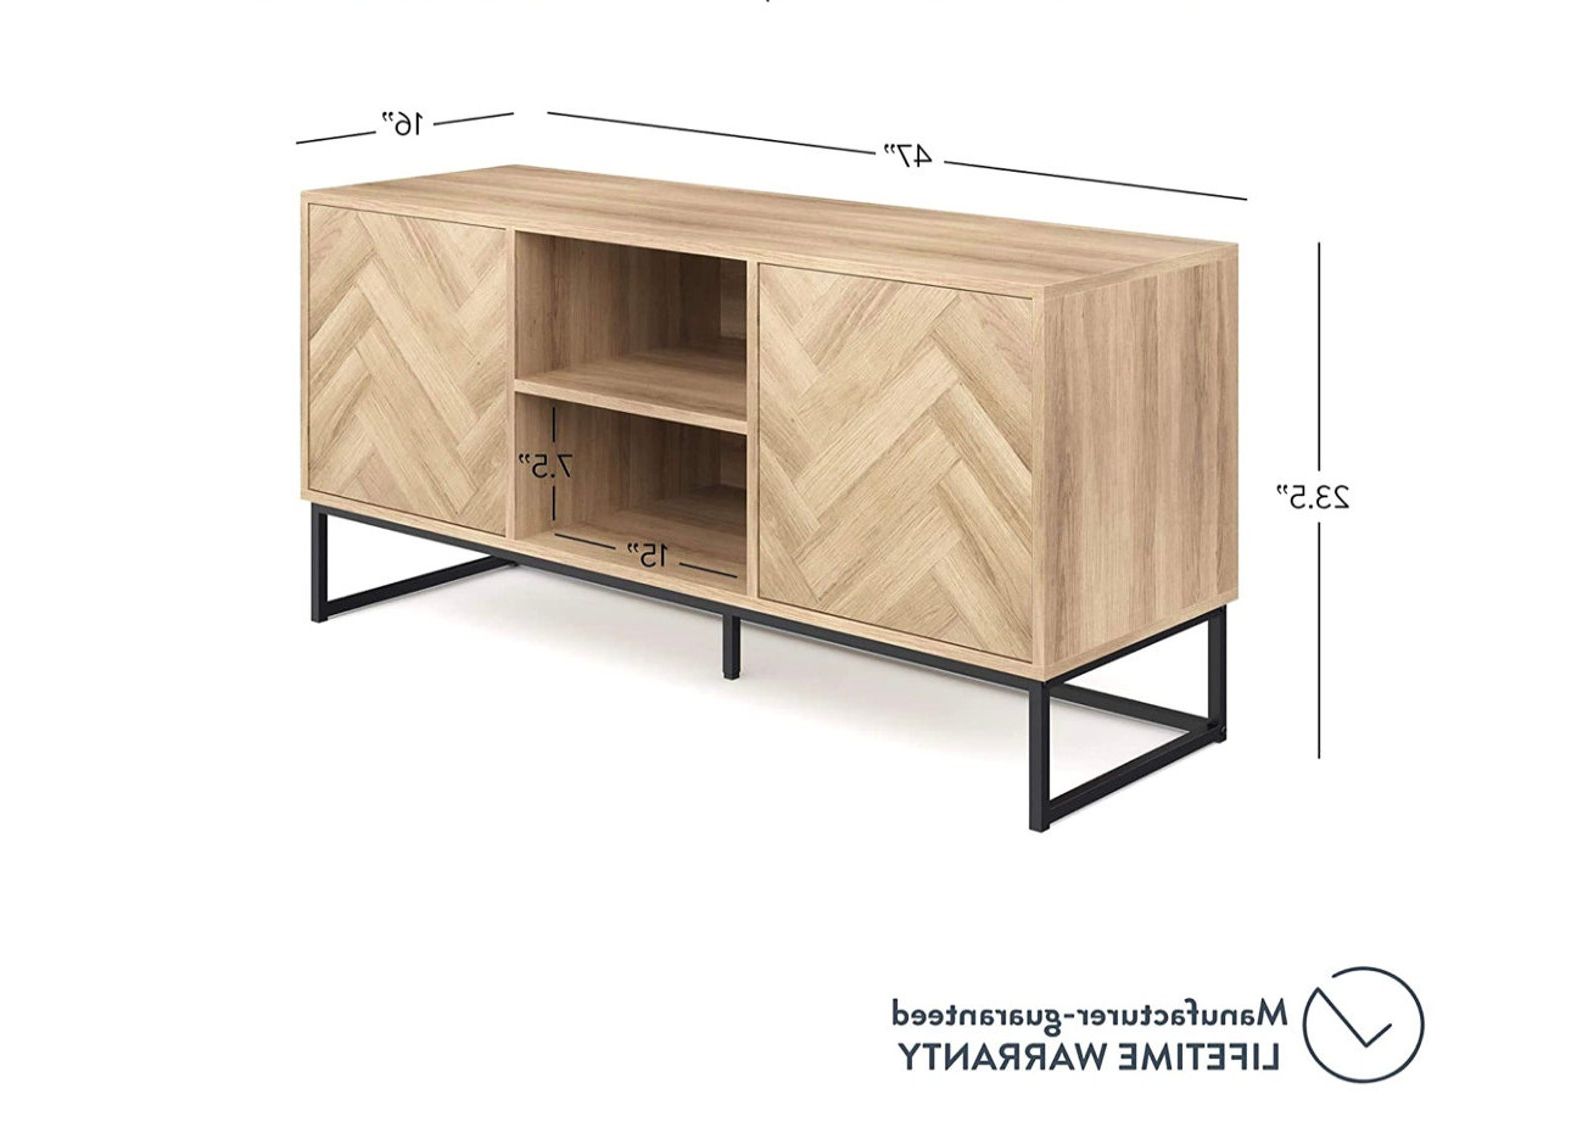 Console Cabinet Or Tv Stand With Doors For Hidden Storage Throughout Media Console Cabinet Tv Stands With Hidden Storage Herringbone Pattern Wood Metal (View 13 of 20)